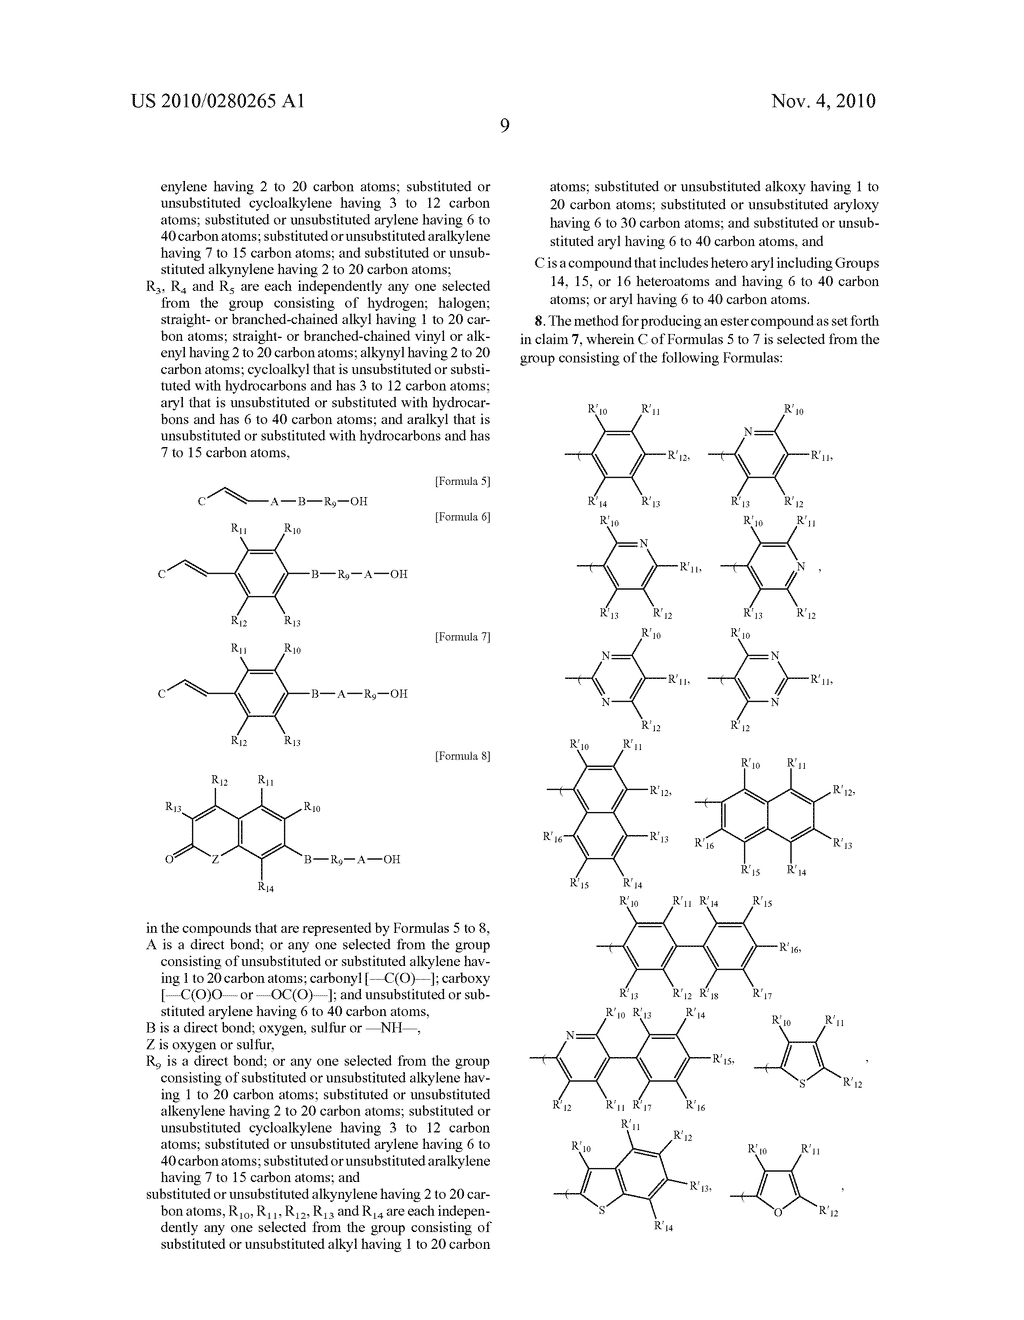 CATALYST COMPOSITION INCLUDING ZIRCONIUM COMPOUNDS FOR ESTERFICATION REACTION AND METHOD FOR PREPARING ESTER COMPOUNDS - diagram, schematic, and image 10